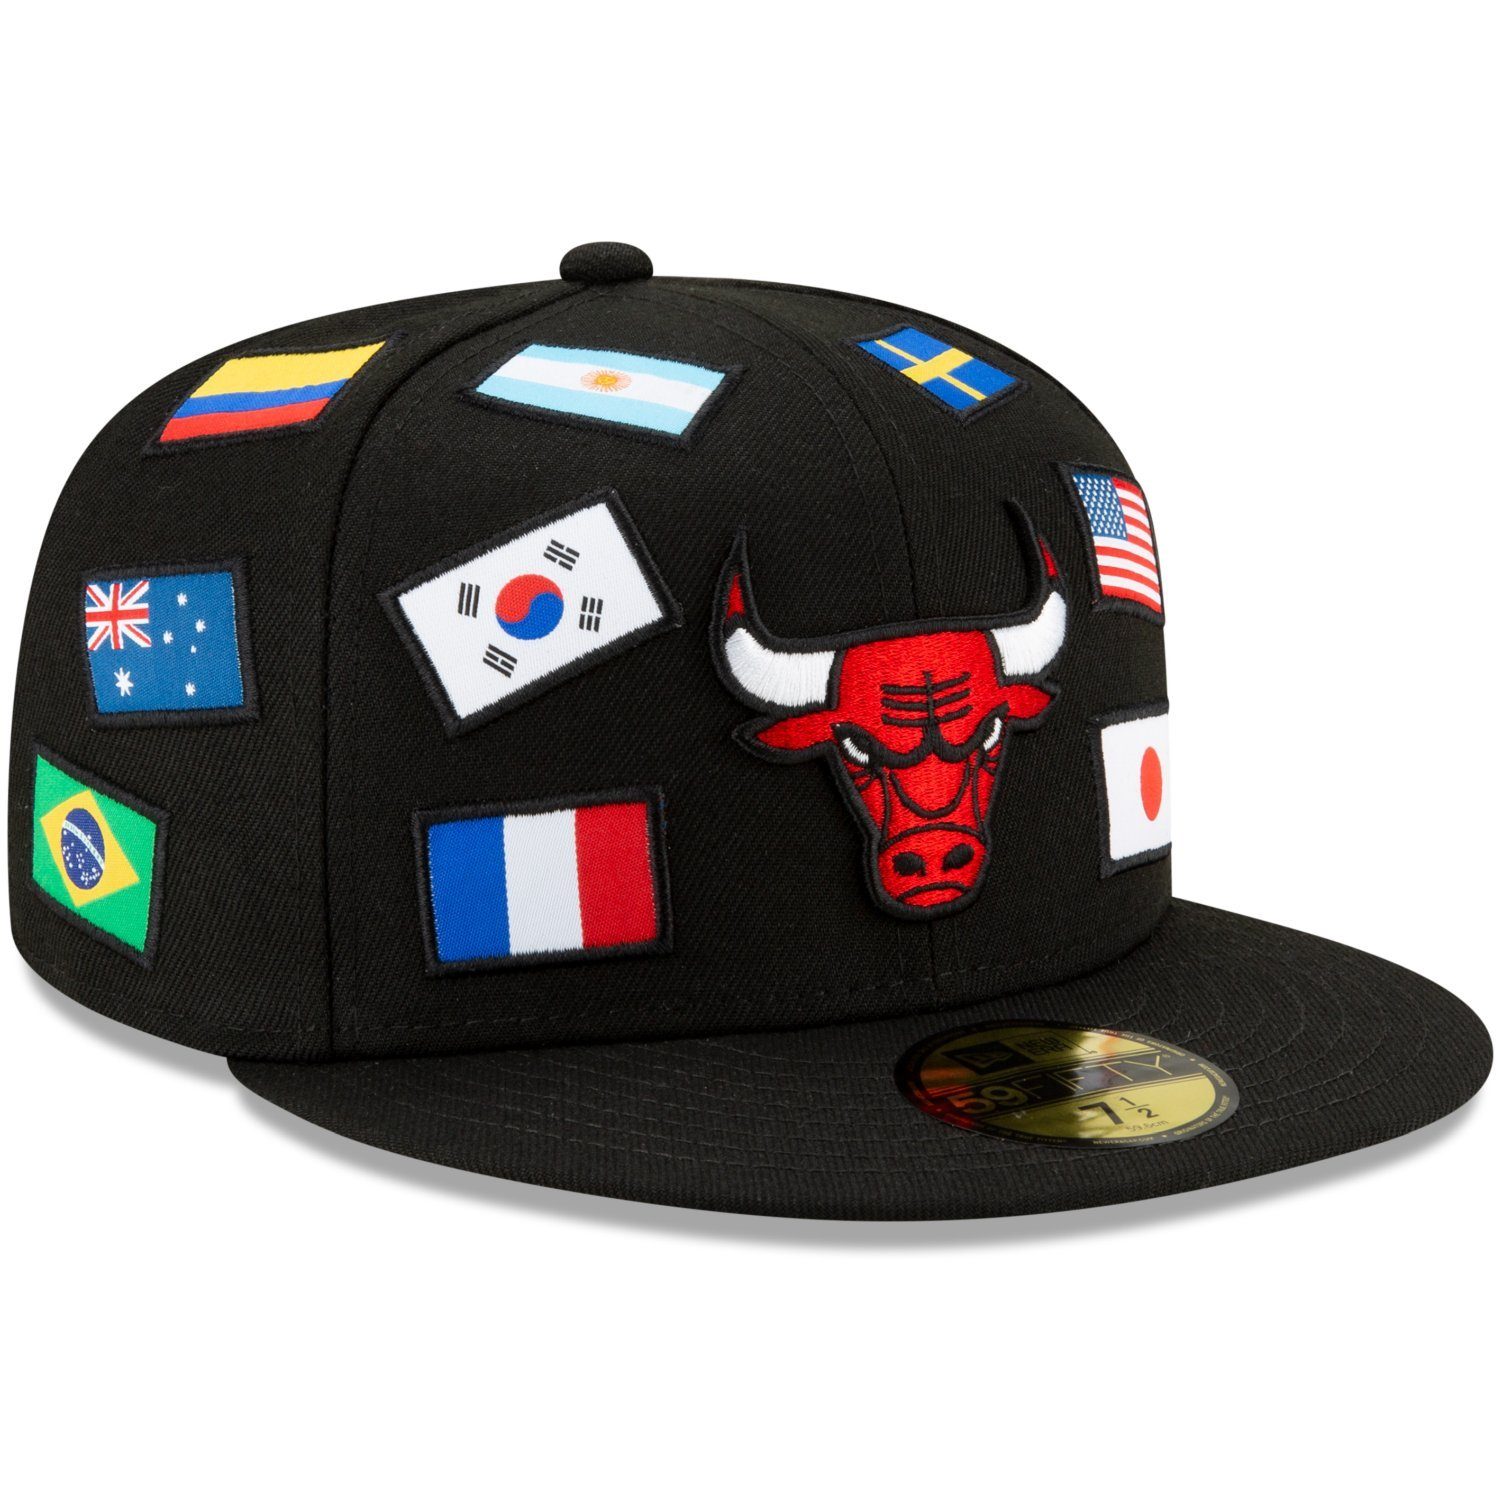 FLAGGED Chicago Era Bulls Fitted 59Fifty Cap New